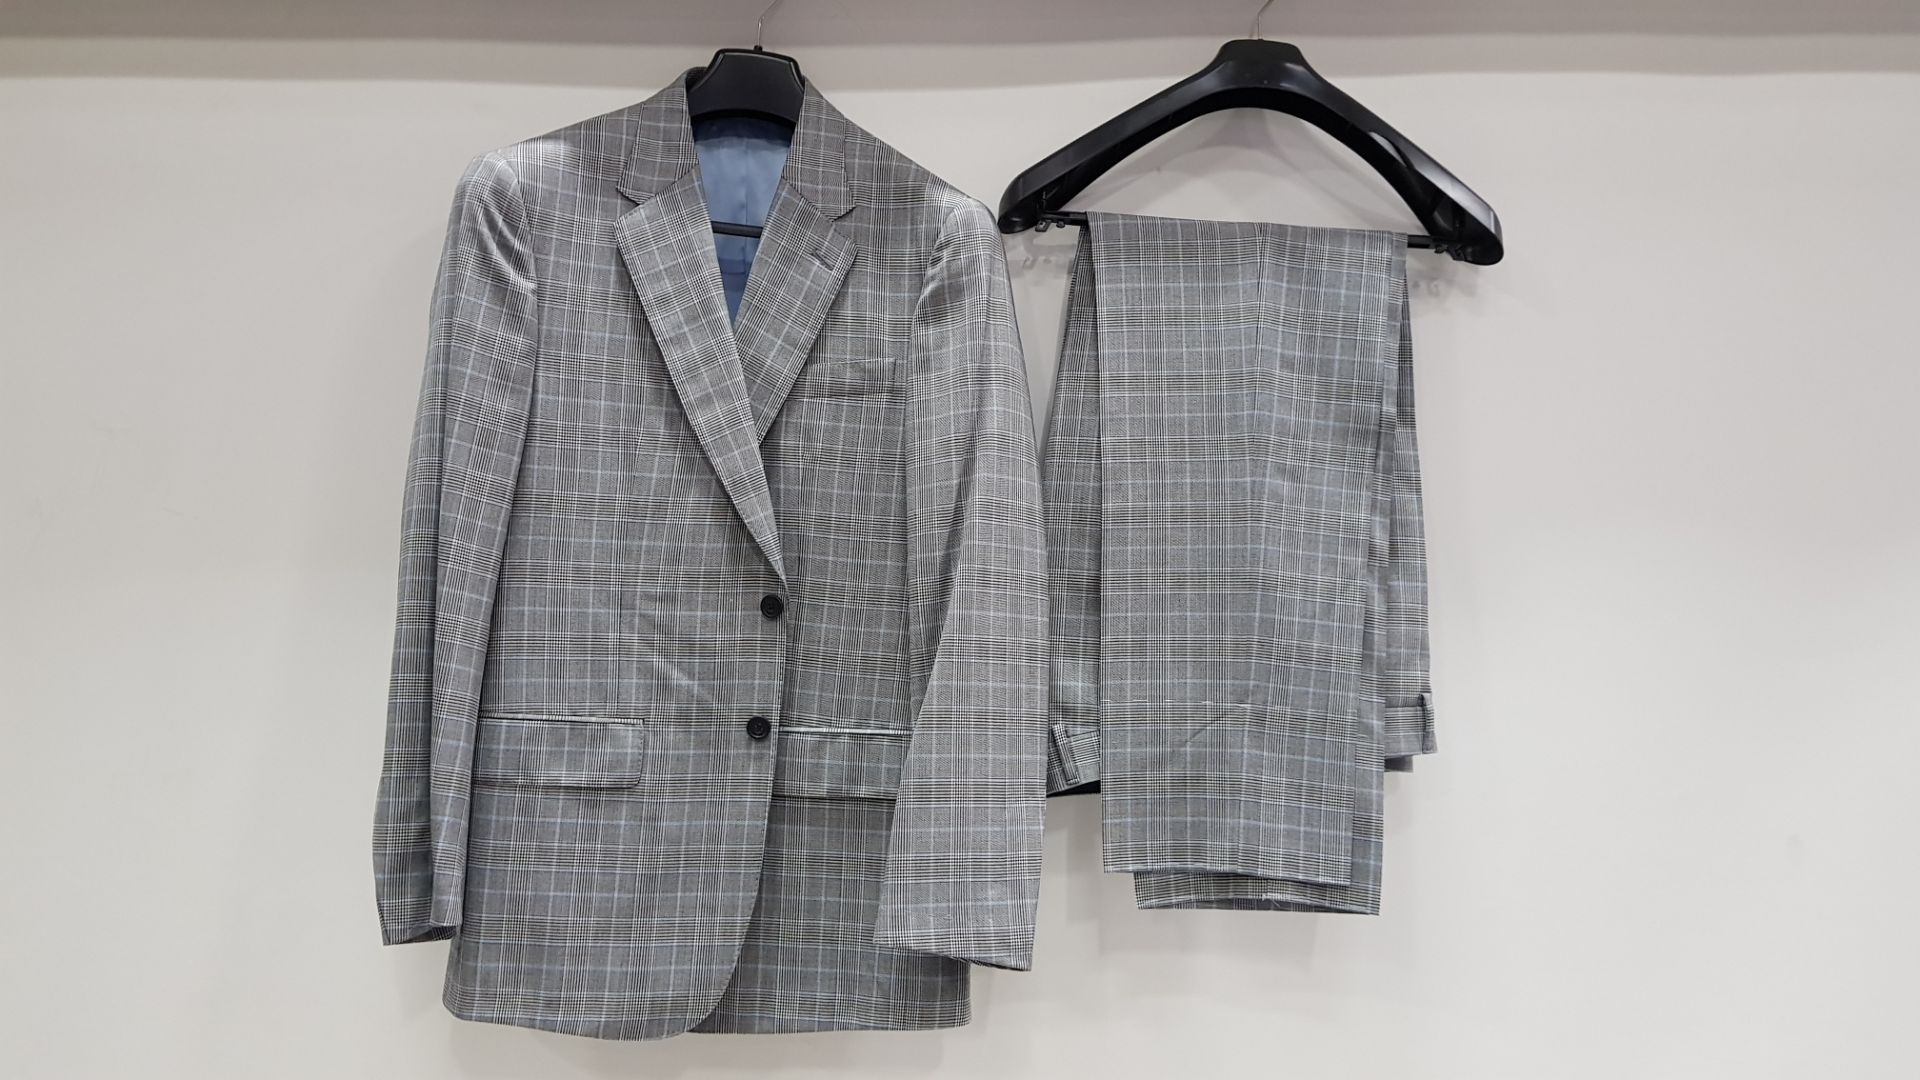 3 X BRAND NEW LUTWYCHE HAND TAILORED GREY & BLUE CHEQUERED SUITS SIZE 44R AND 42R (PLEASE NOTE SUITS